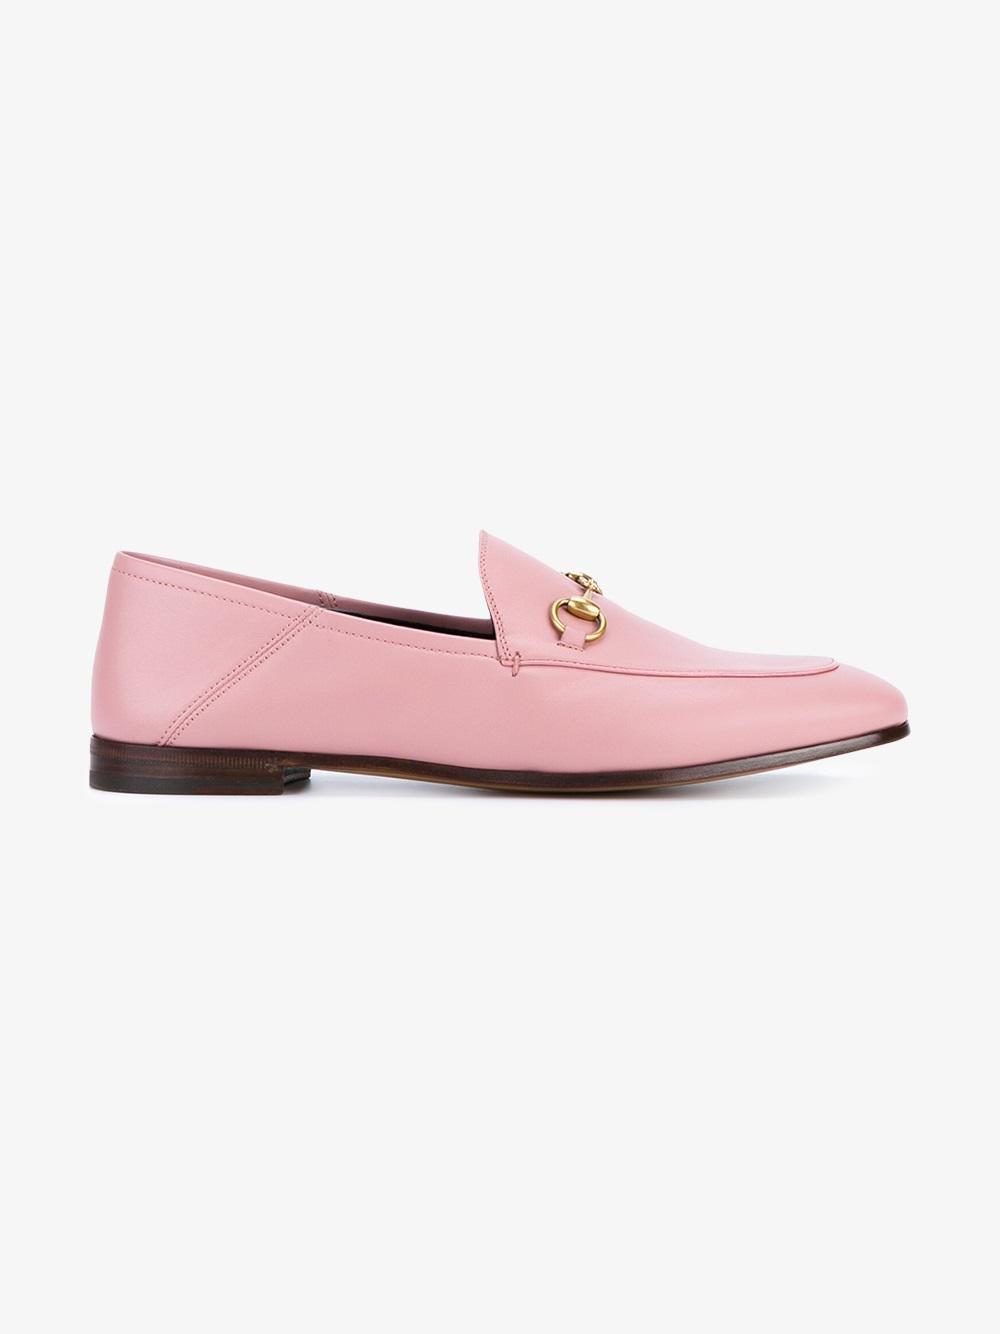 Gucci Jordaan Leather Loafers in Pink | Lyst